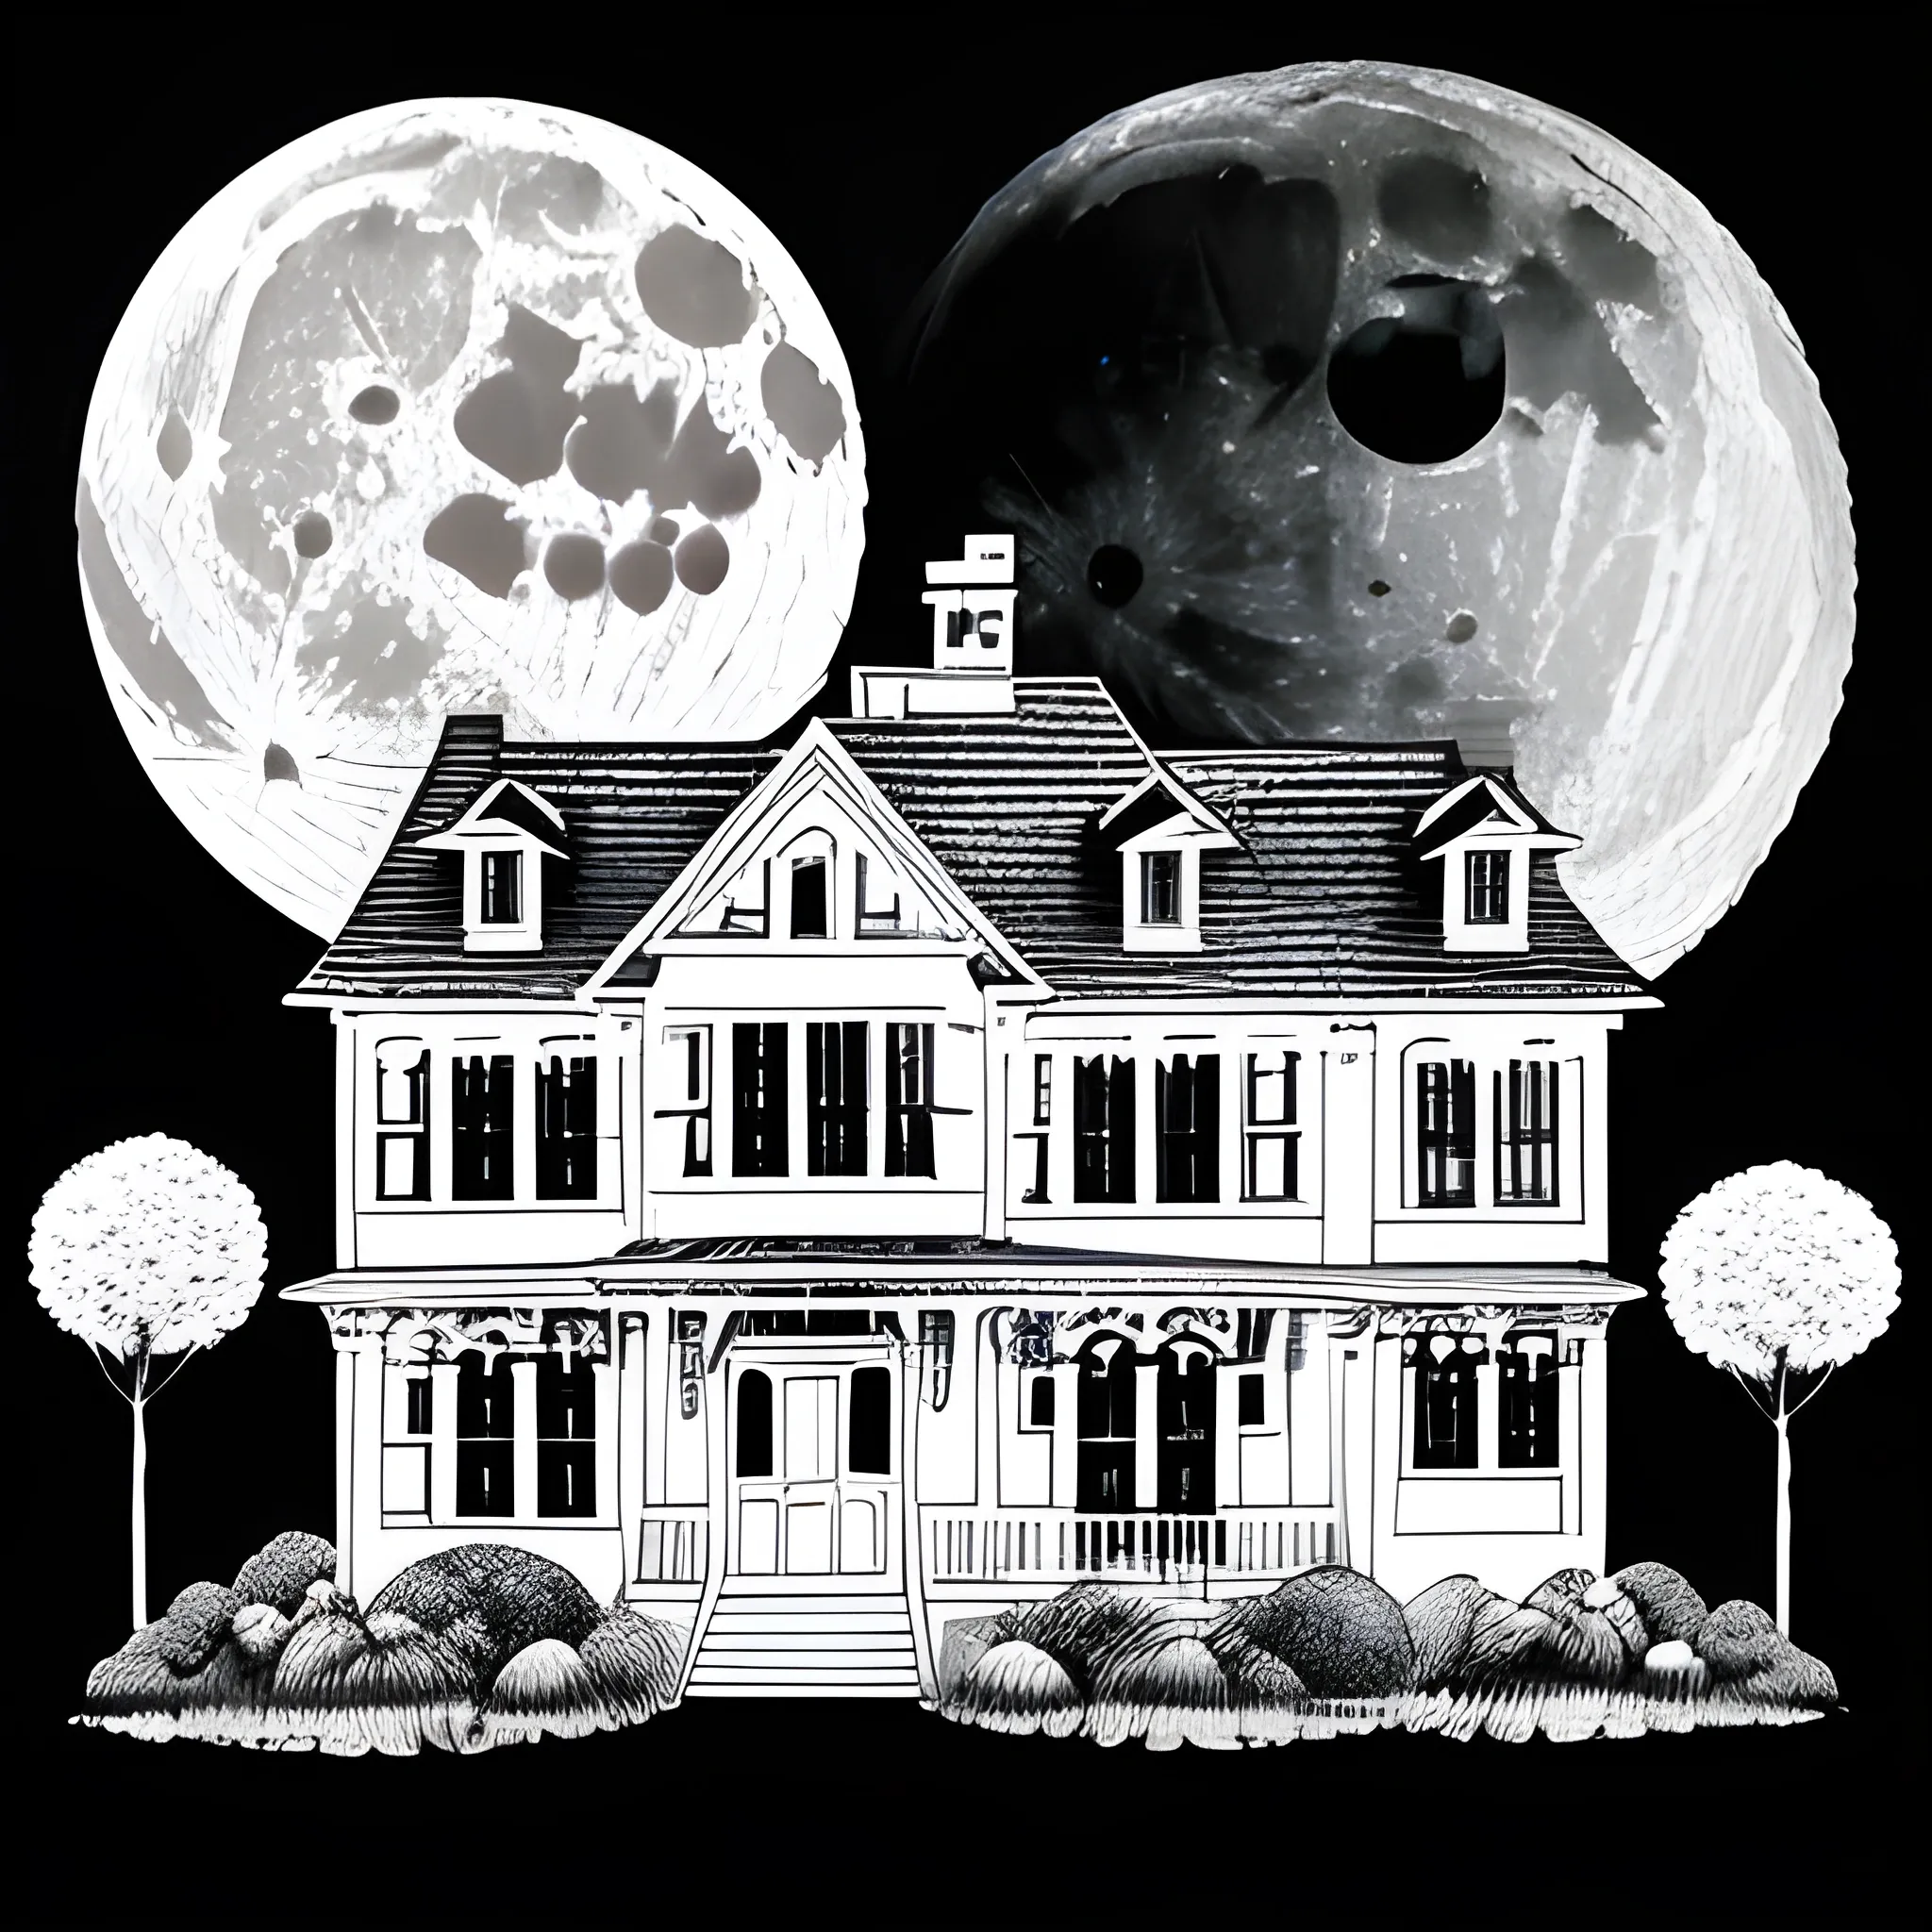 coloring book white, house in halloween, with the moon, only lines, background white
